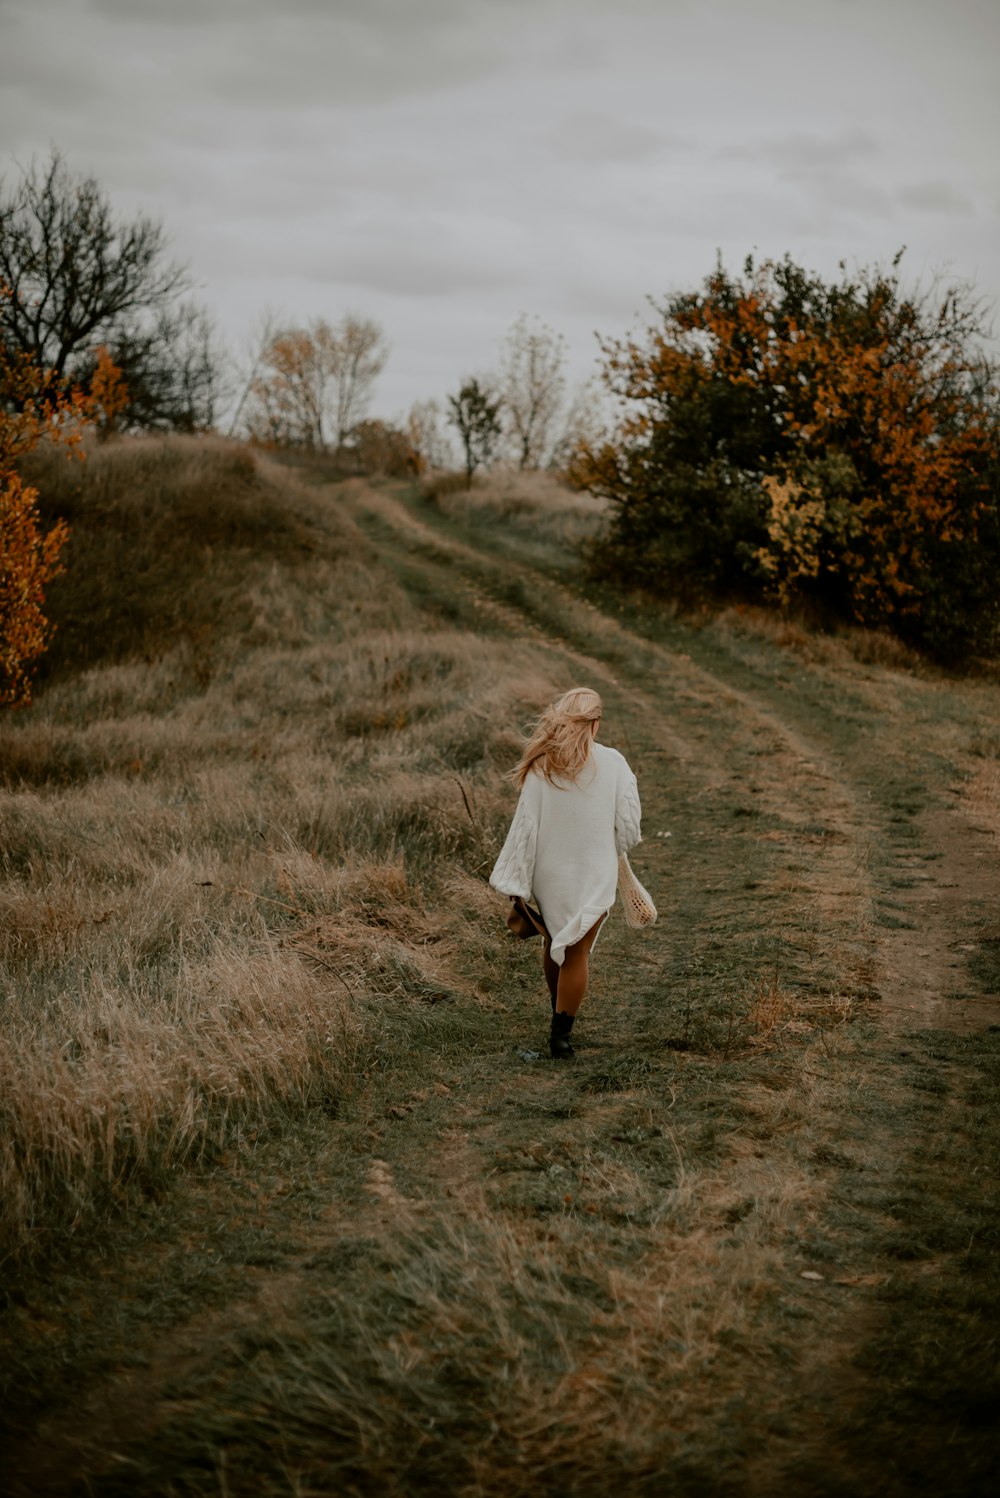 a person walking on a dirt path